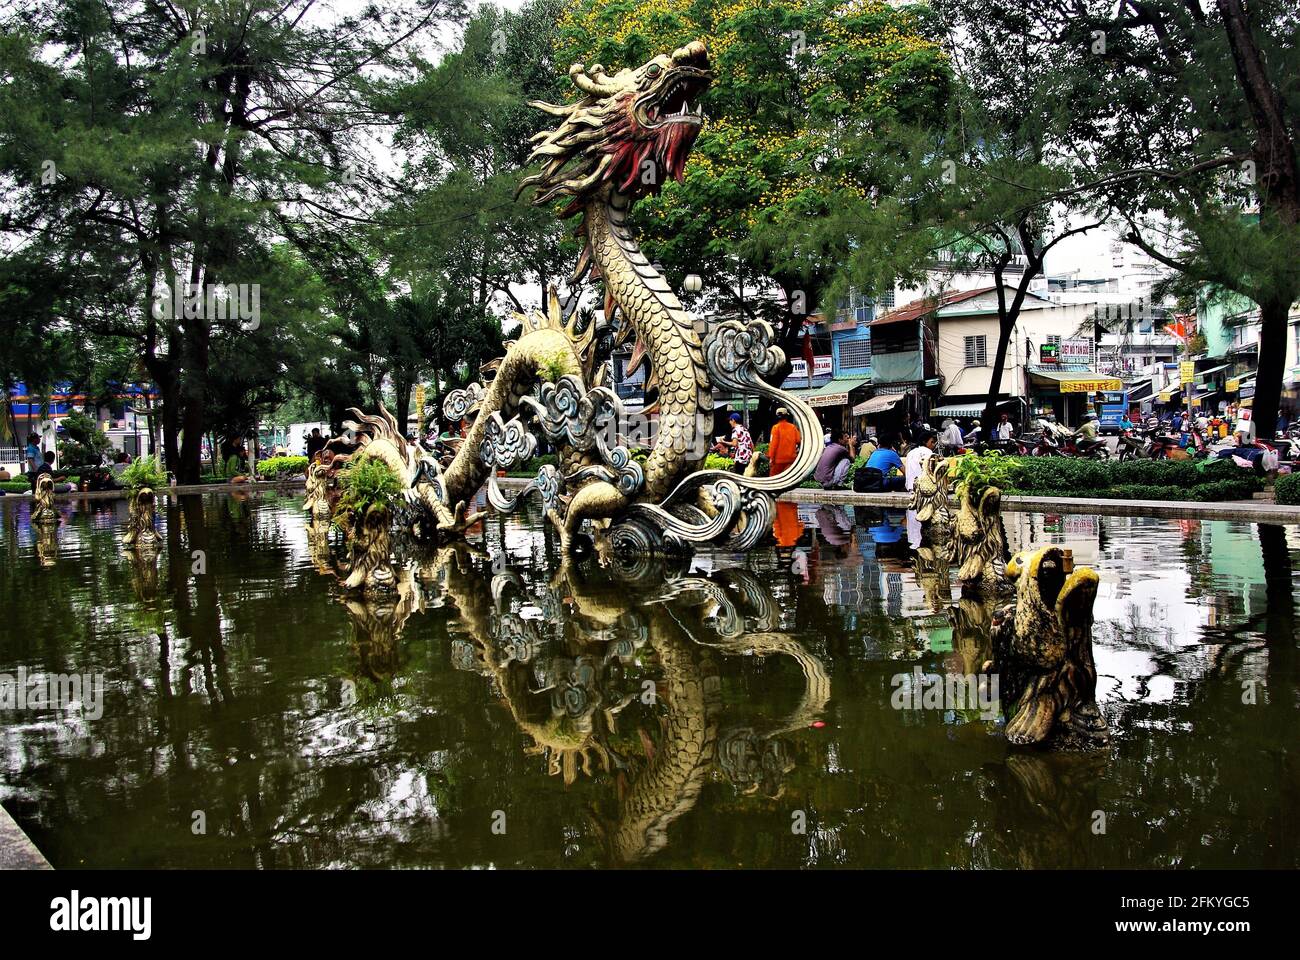 Urban park with pond and dragon fountain sculpture, Chinatown, Ho Chi Minh City, Vietnam, Asia Stock Photo